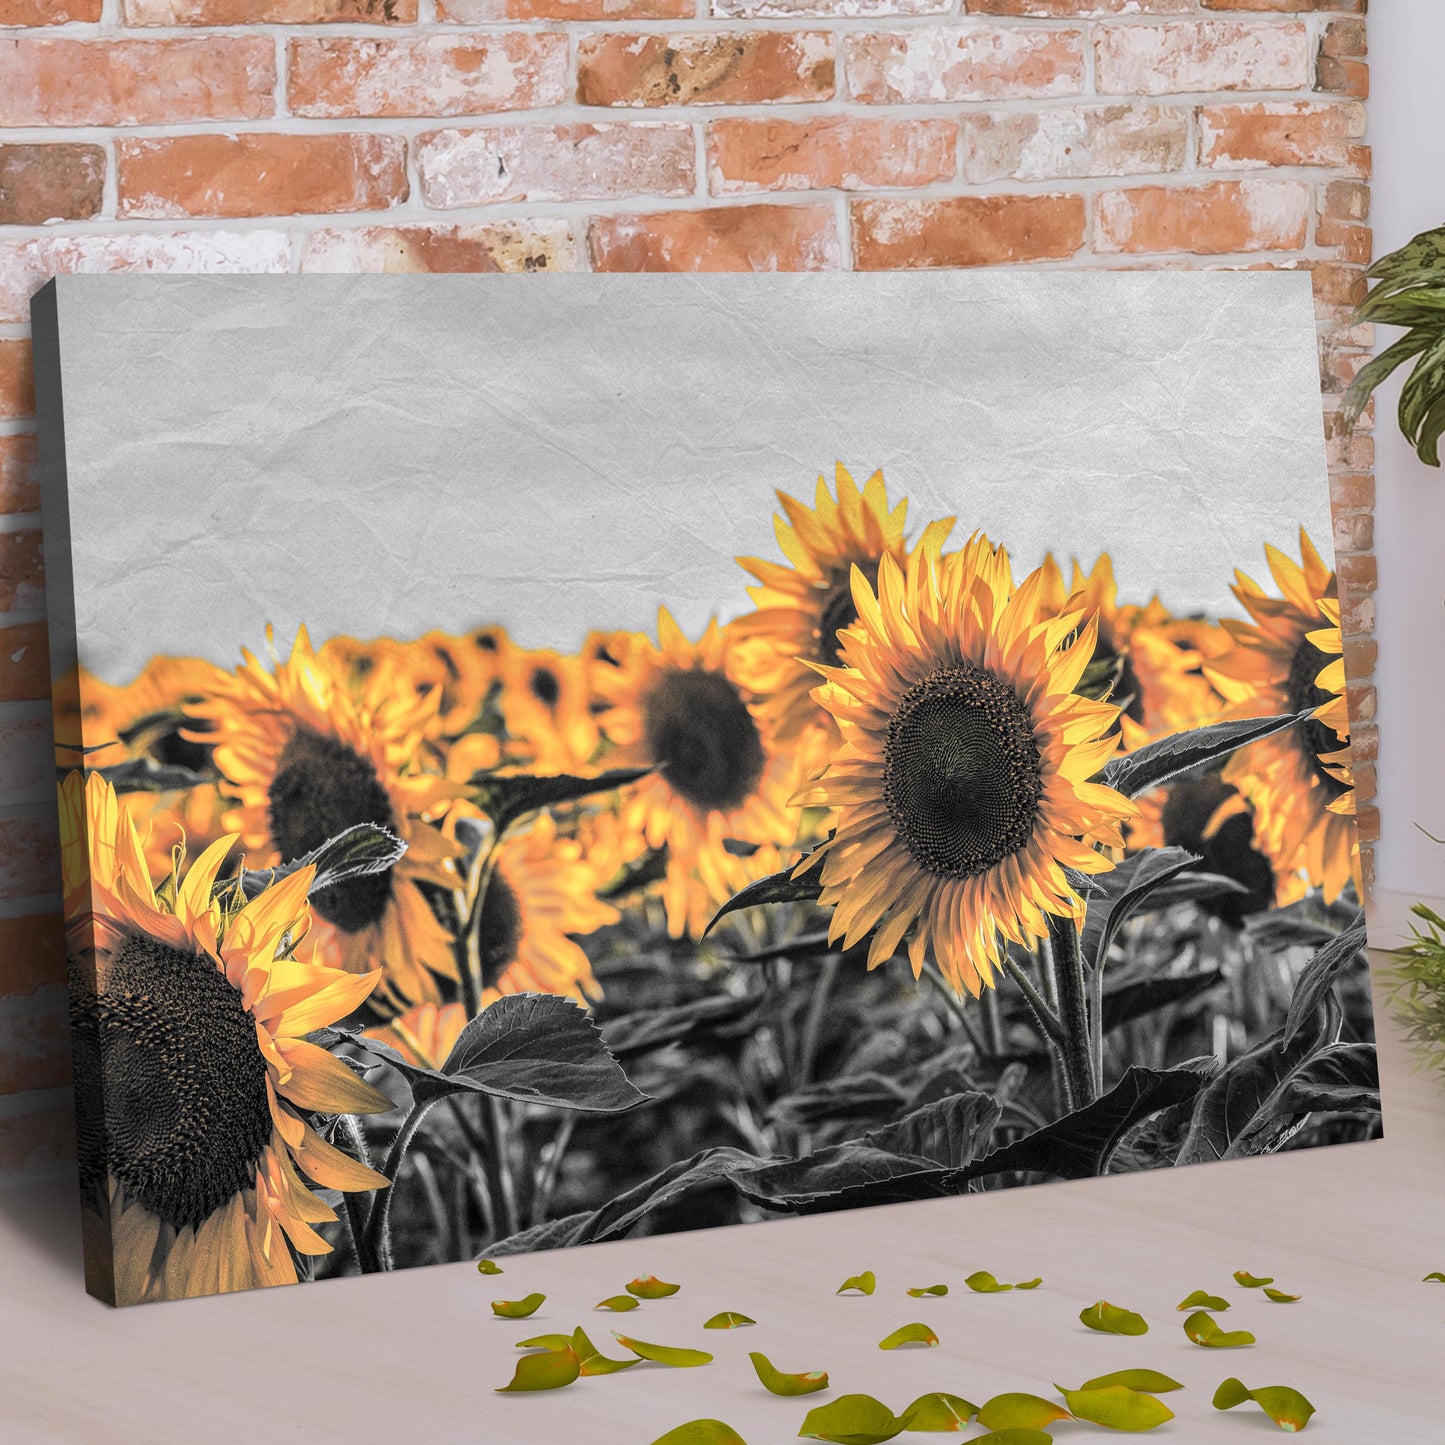 Rustic Pop Sunflower Canvas Wall Art Style 1 - Image by Tailored Canvases